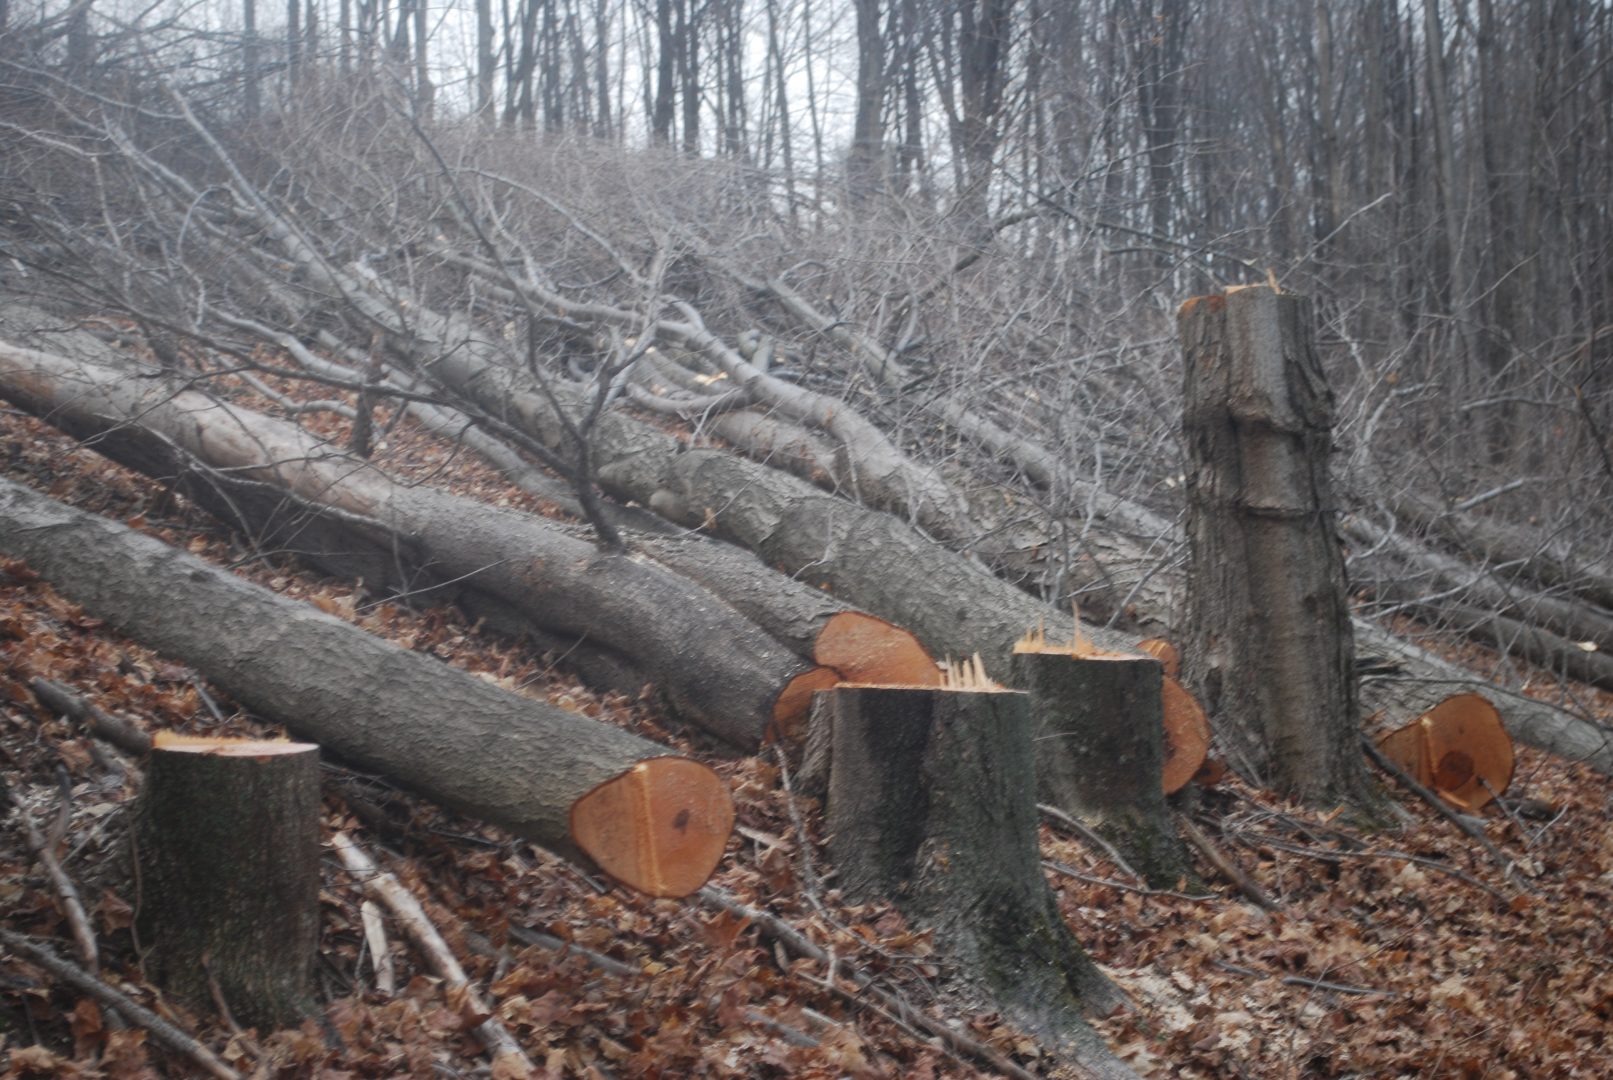 Trees cut on a Susquehanna County property in March 2016 to make way for the proposed Constitution Pipeline. The company has said it will fight a FERC order upholding New York State's denial of a permit for the project.